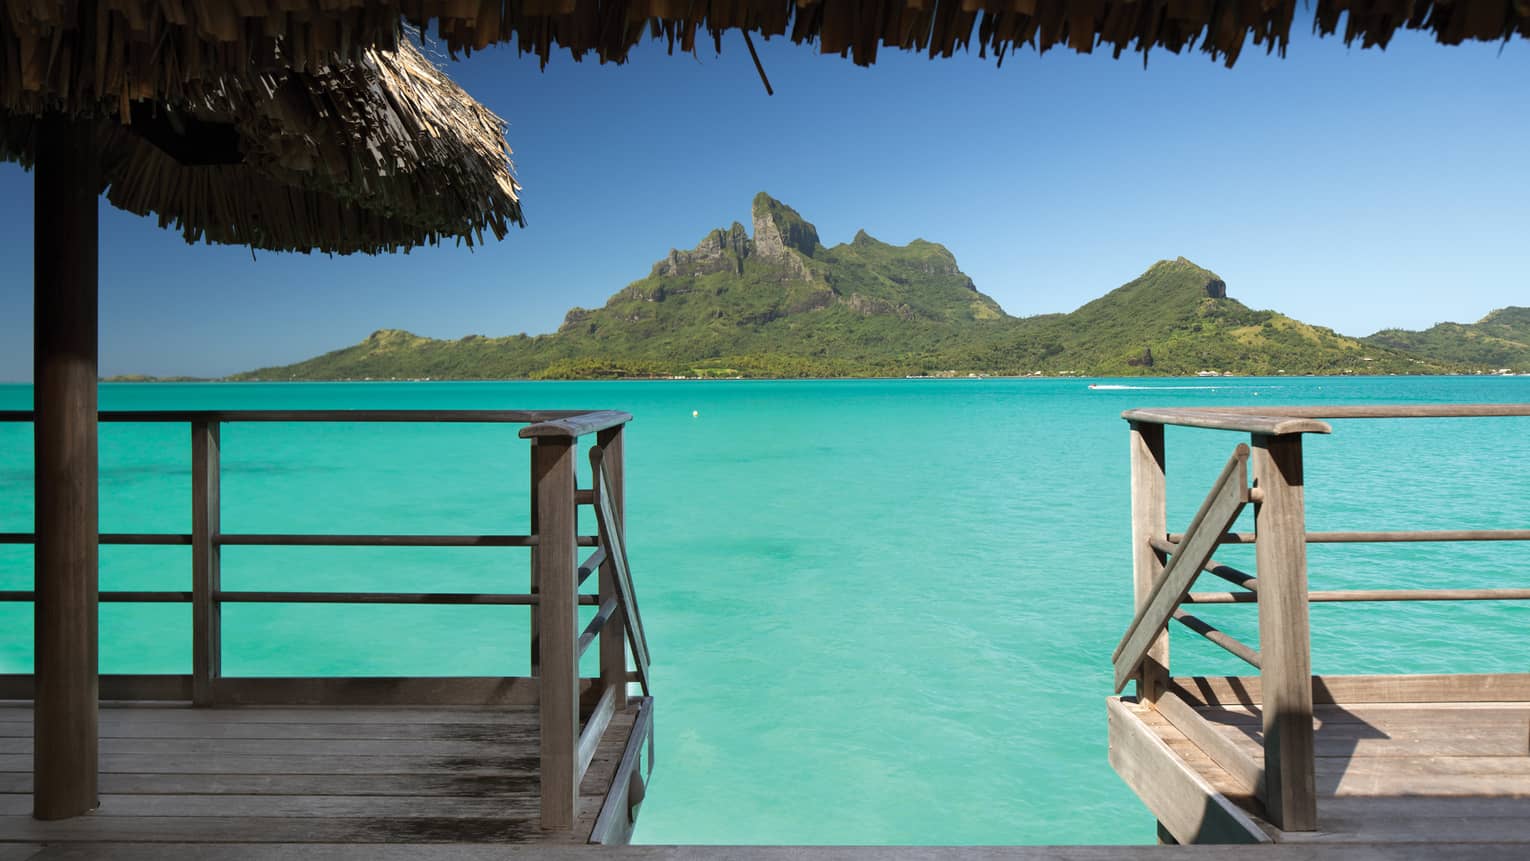 Water view from an overwater bungalow in Bora Bora